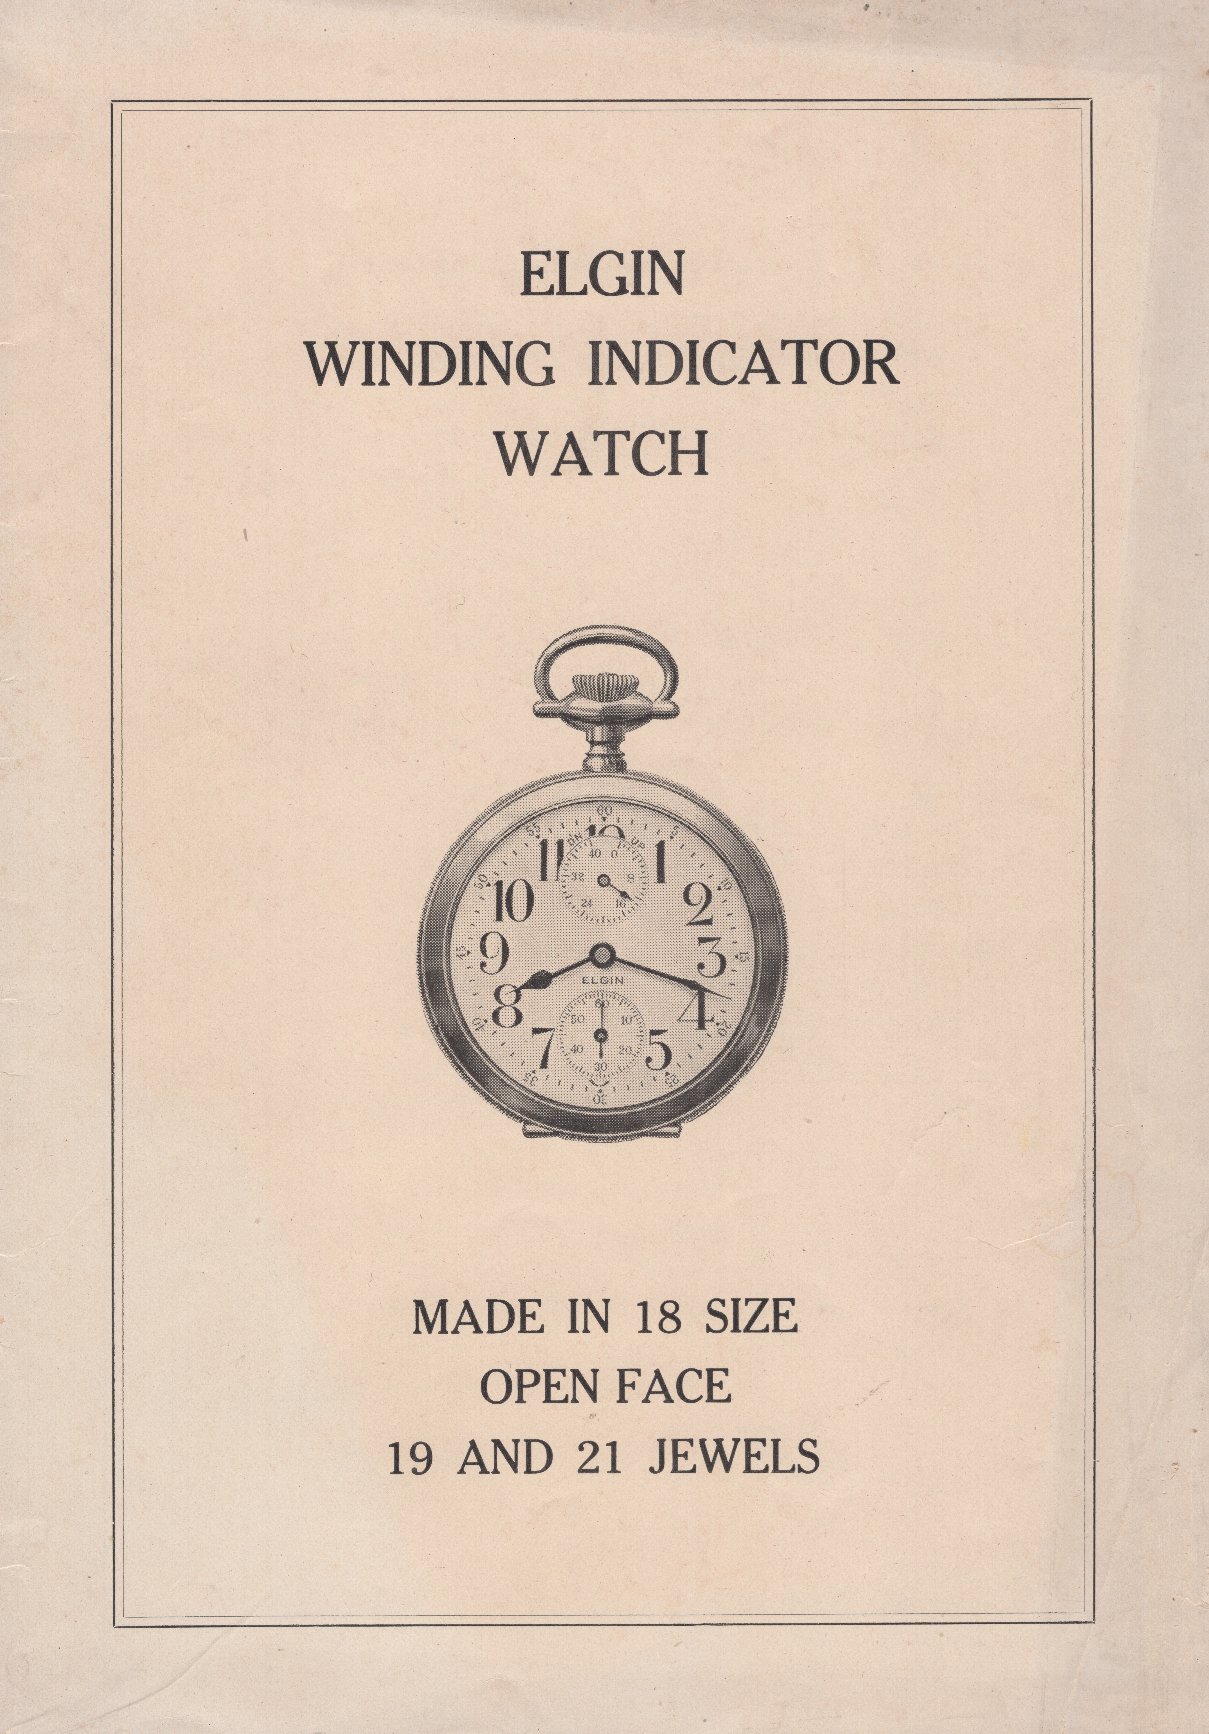 Elgin Winding Indicator Watch Pamphlet Cover Image